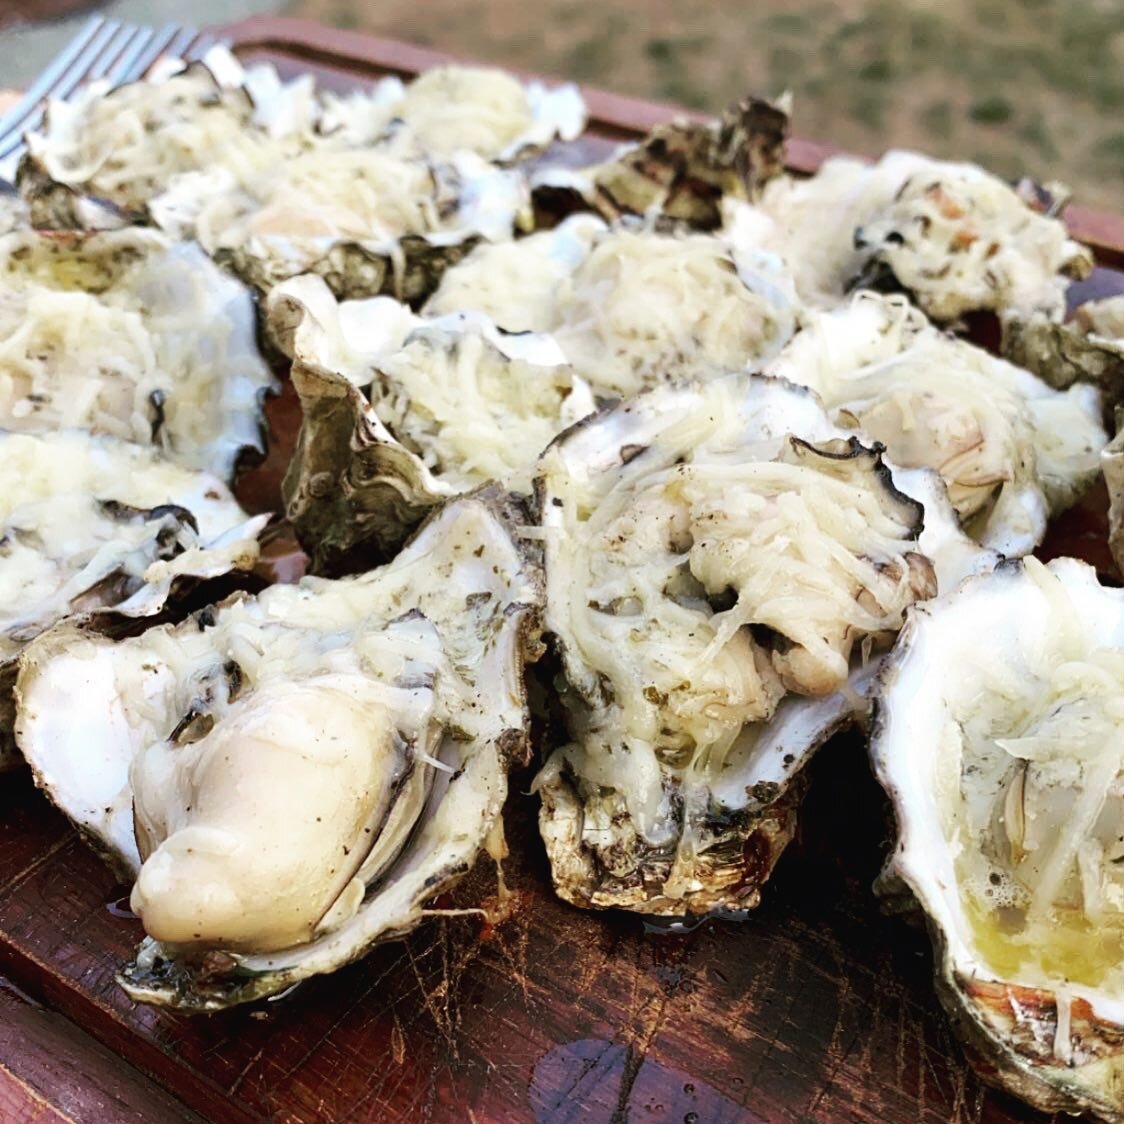 🦪Current cravings🦪

Penn Cove Oysters grilled on the half shell. Then topped with a garlic butter &amp; Parmesan cheese melted to perfection. 

What&rsquo;s your favorite thing to grill during the summer? 

#mussels #shipping #overnightshipping #ti